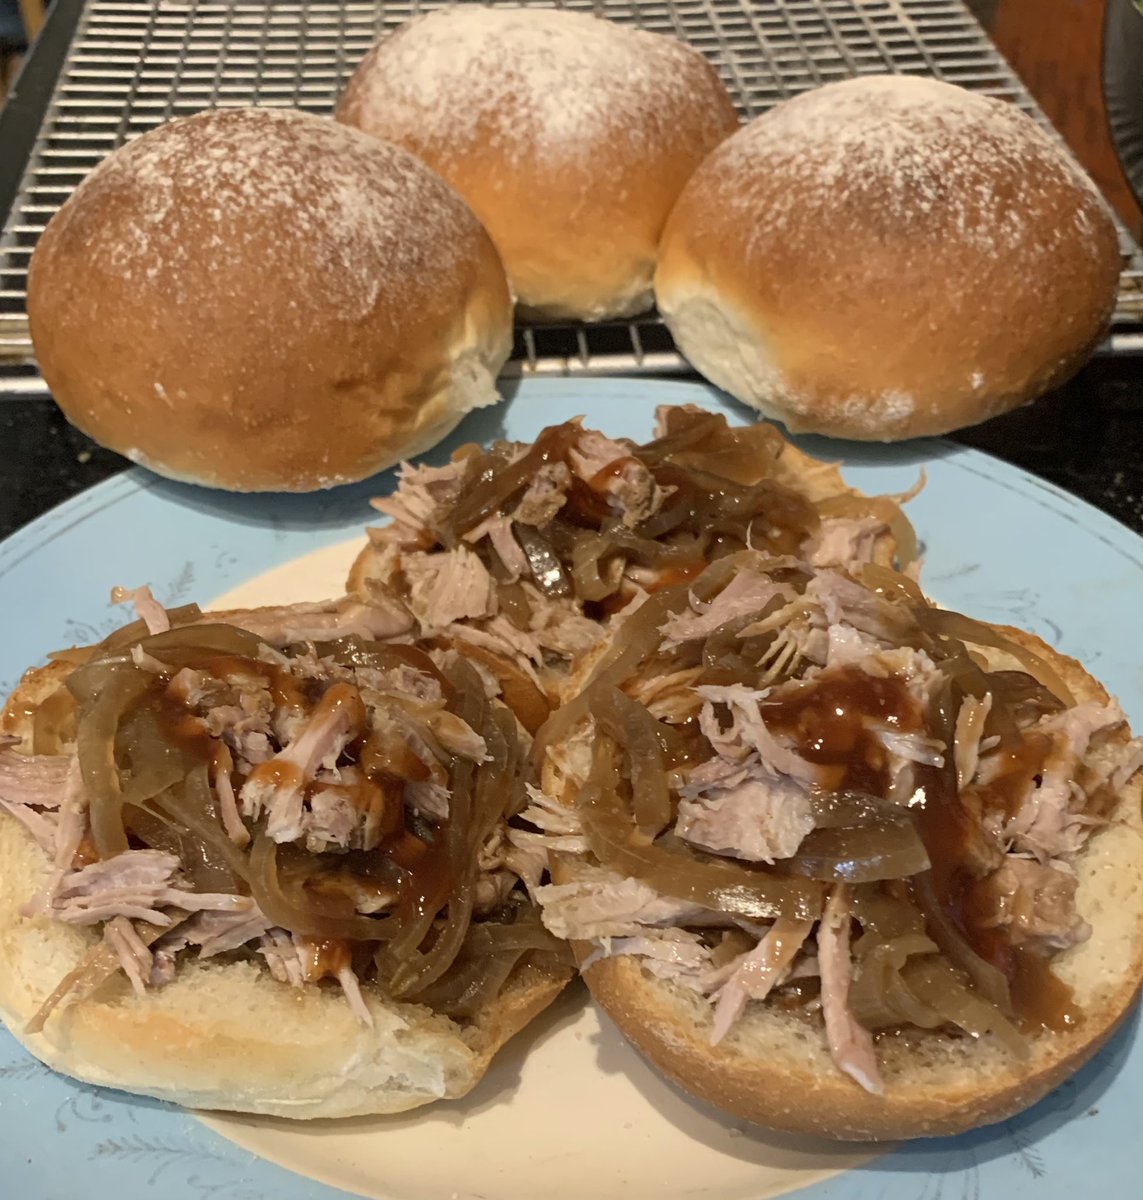 Soft #bread buns, for pulled pork sandwiches, with onion gravy & bbq sauce.